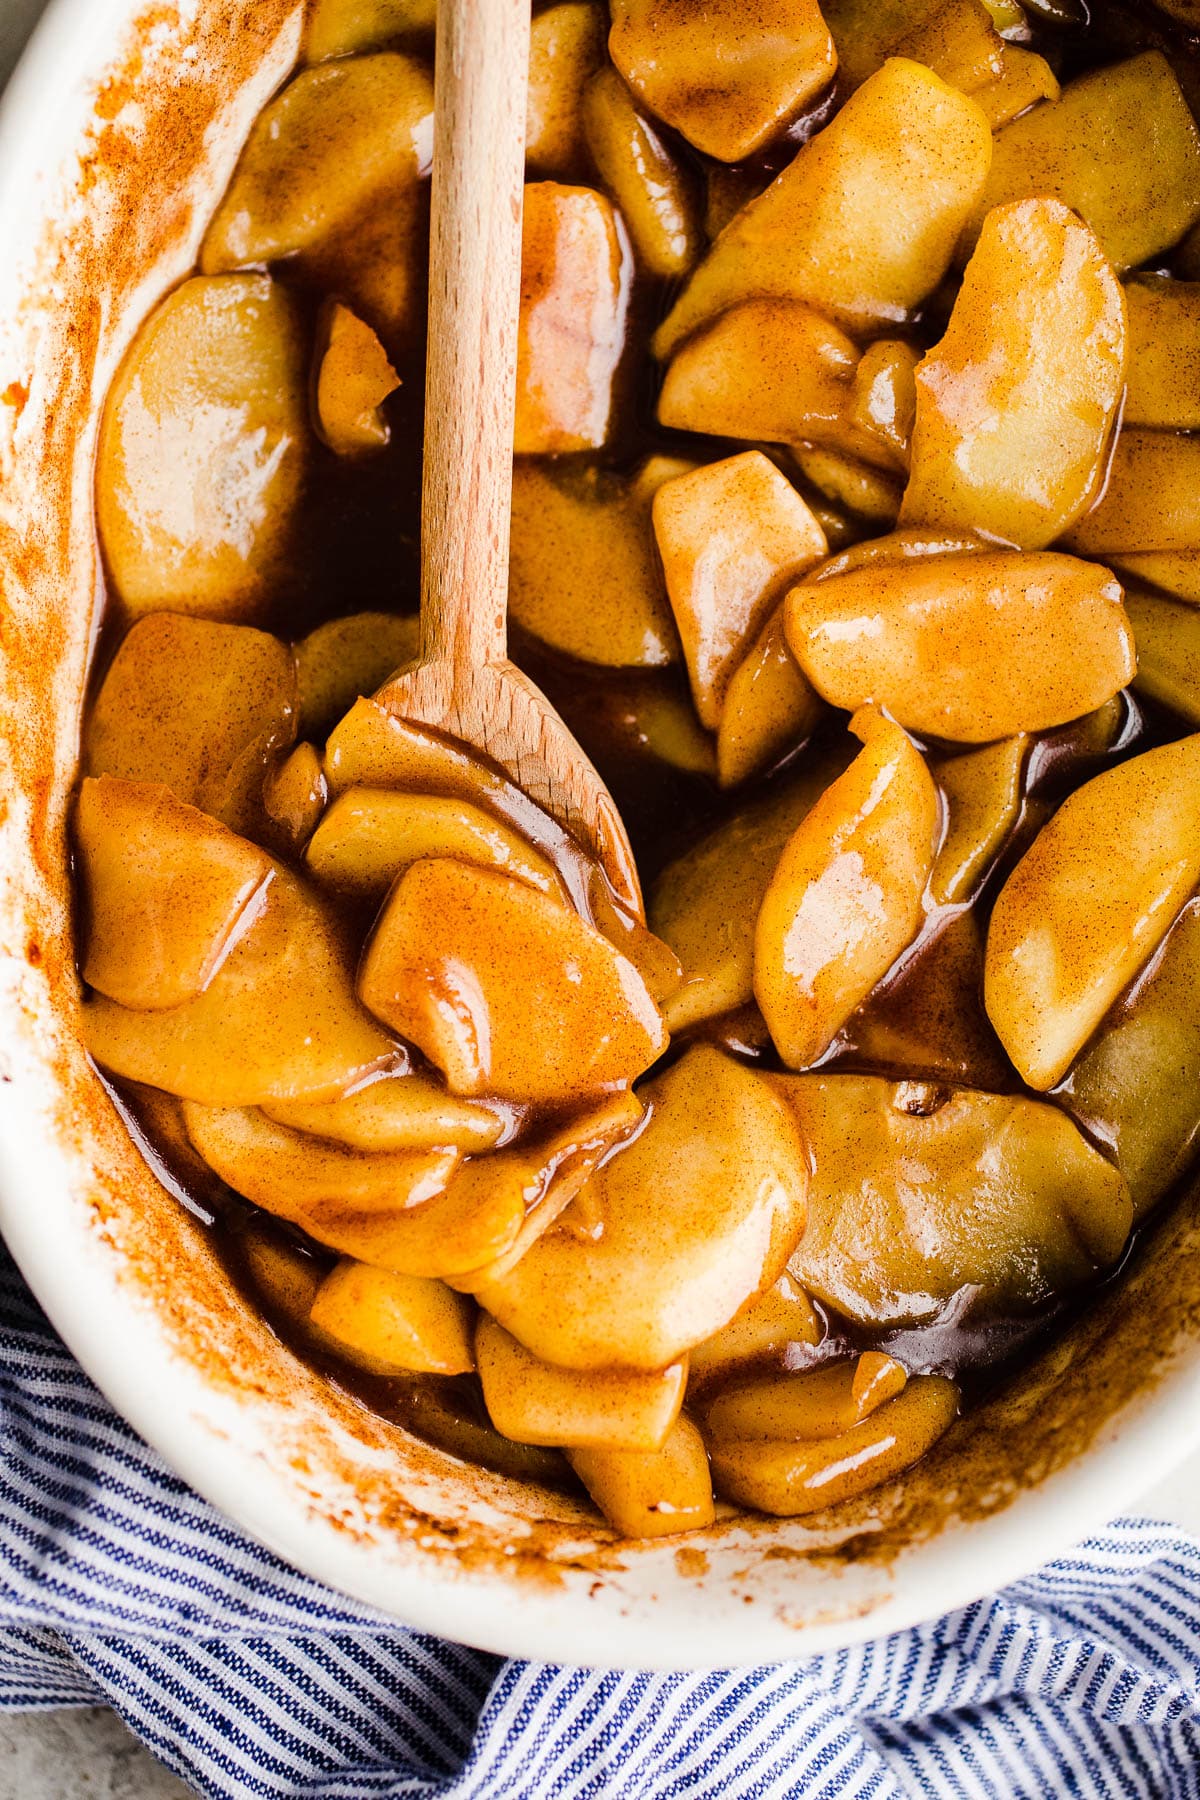 Cinnamon apples in syrup inside of a white baking dish with a wooden spoon.